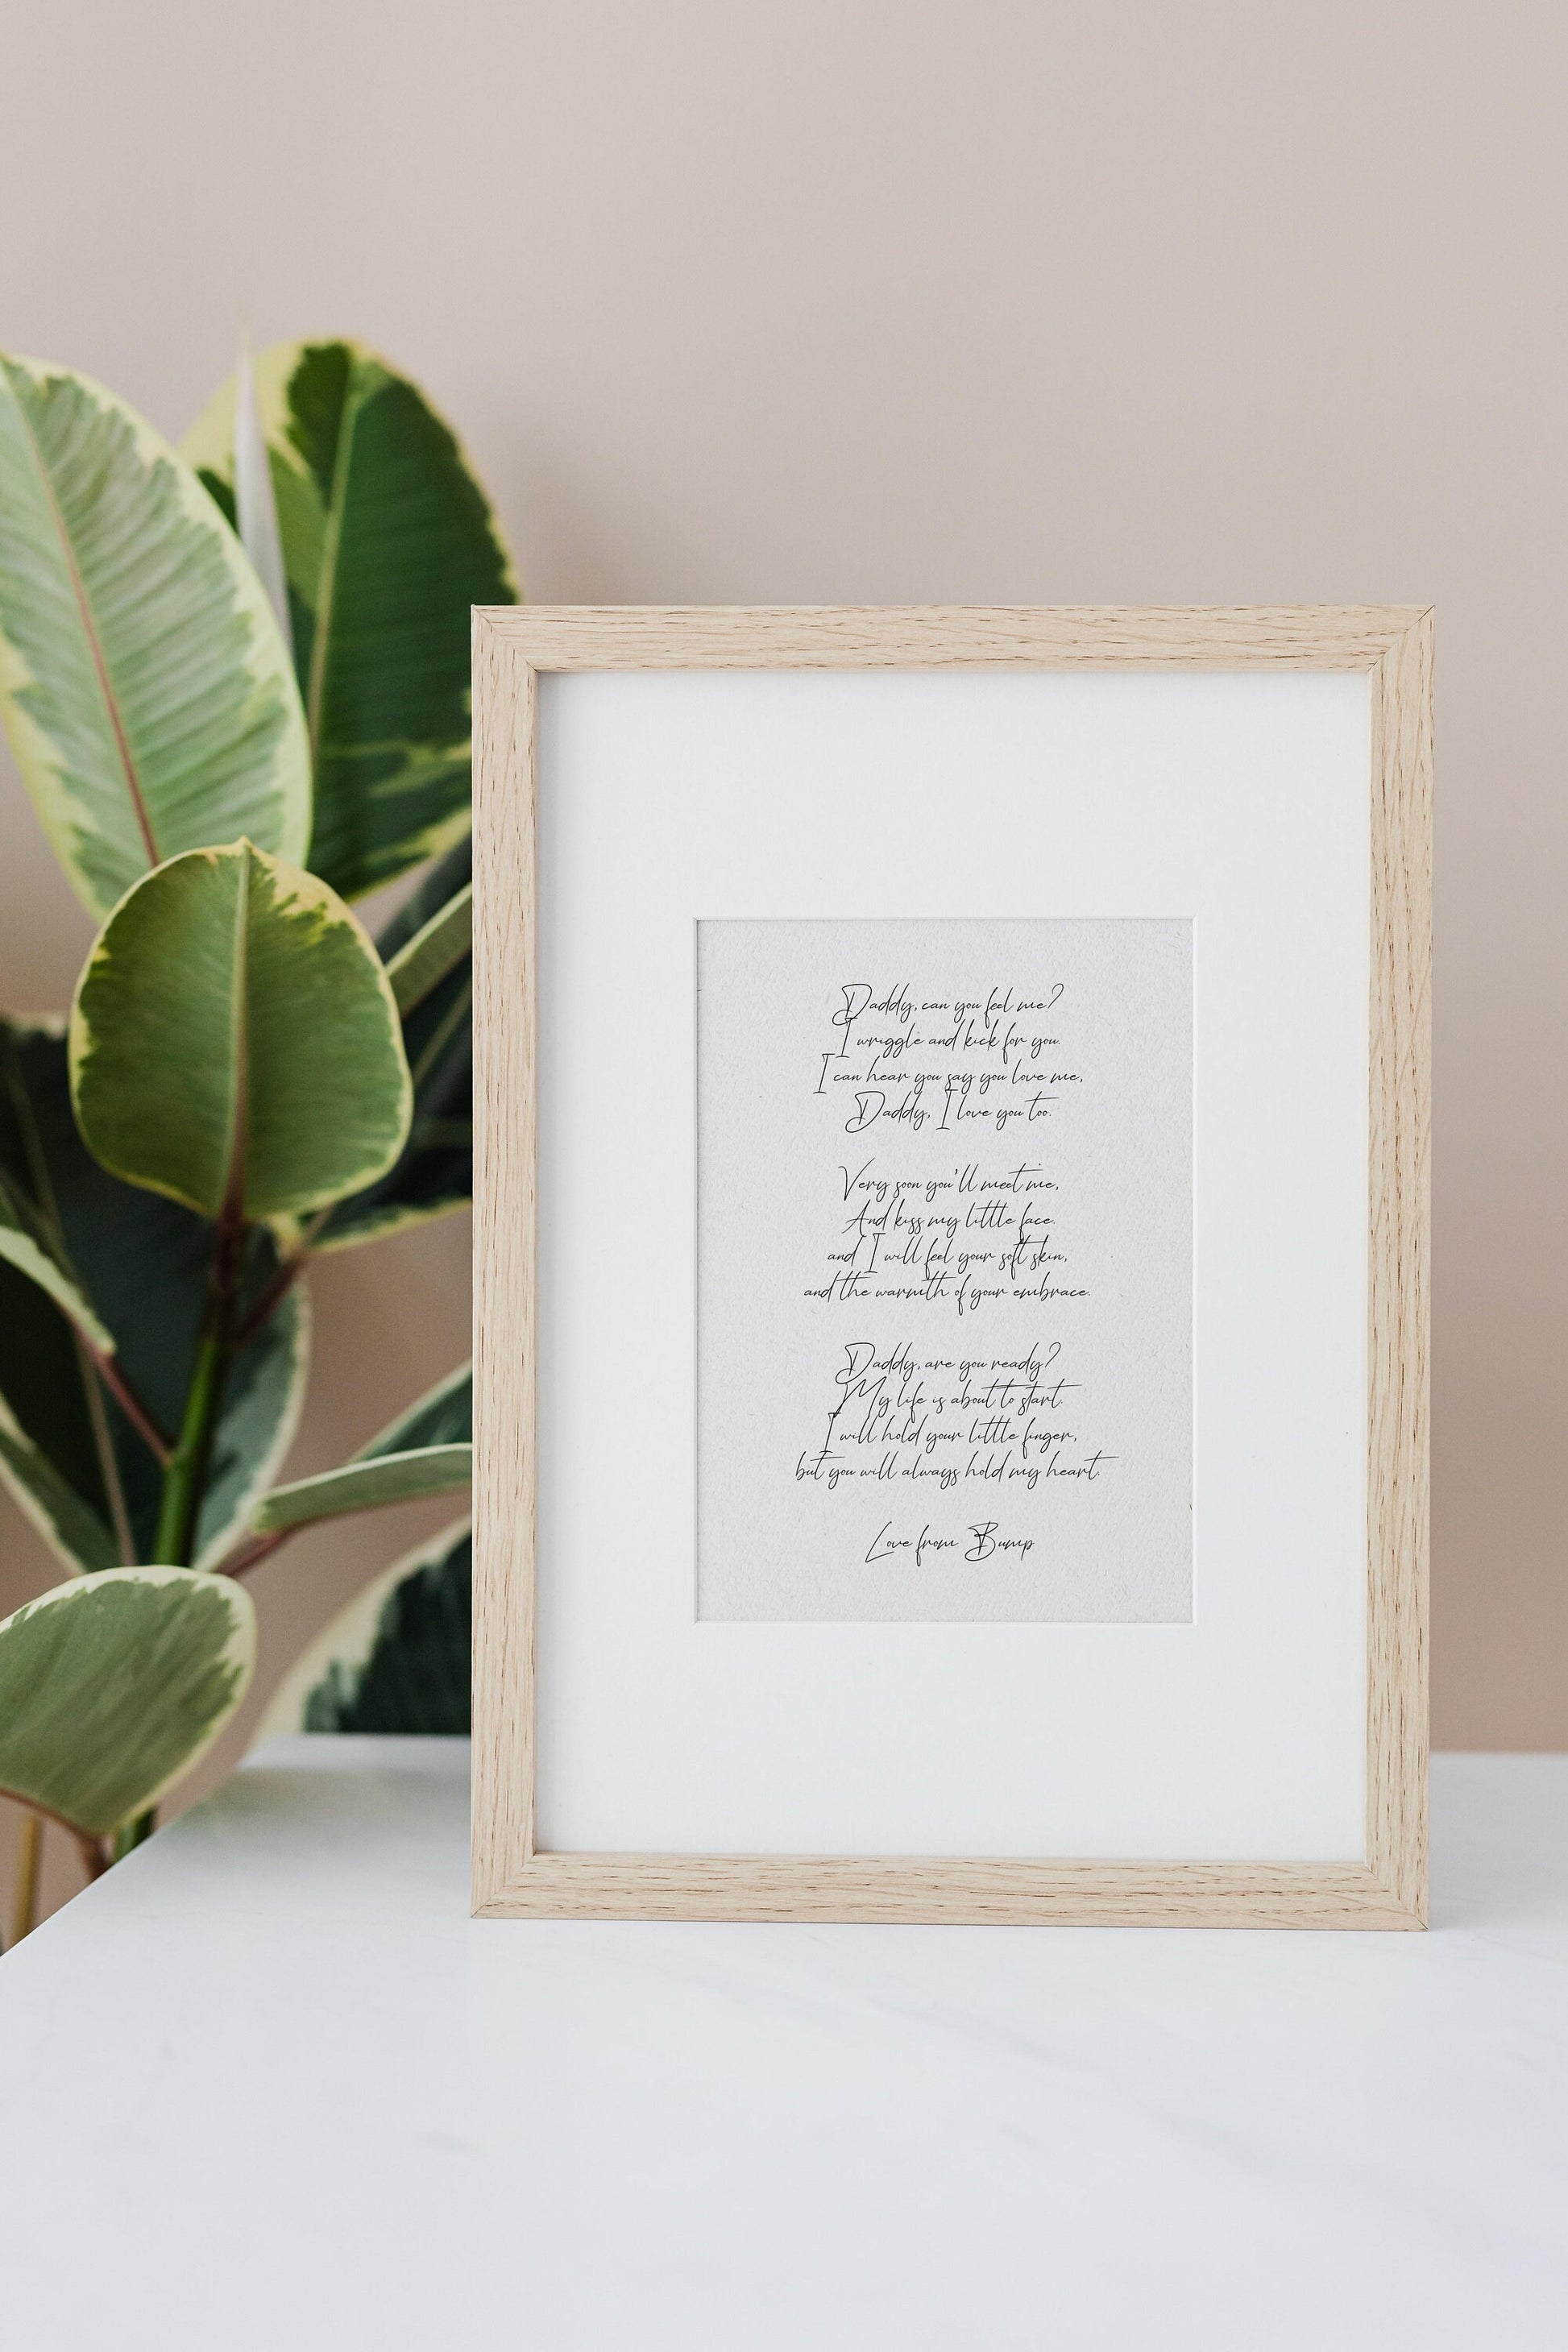 Daddy to be Poem for new Dad Print Framed poem, Dad to be Poem, New parent Framed Calligraphy & Typography New Father